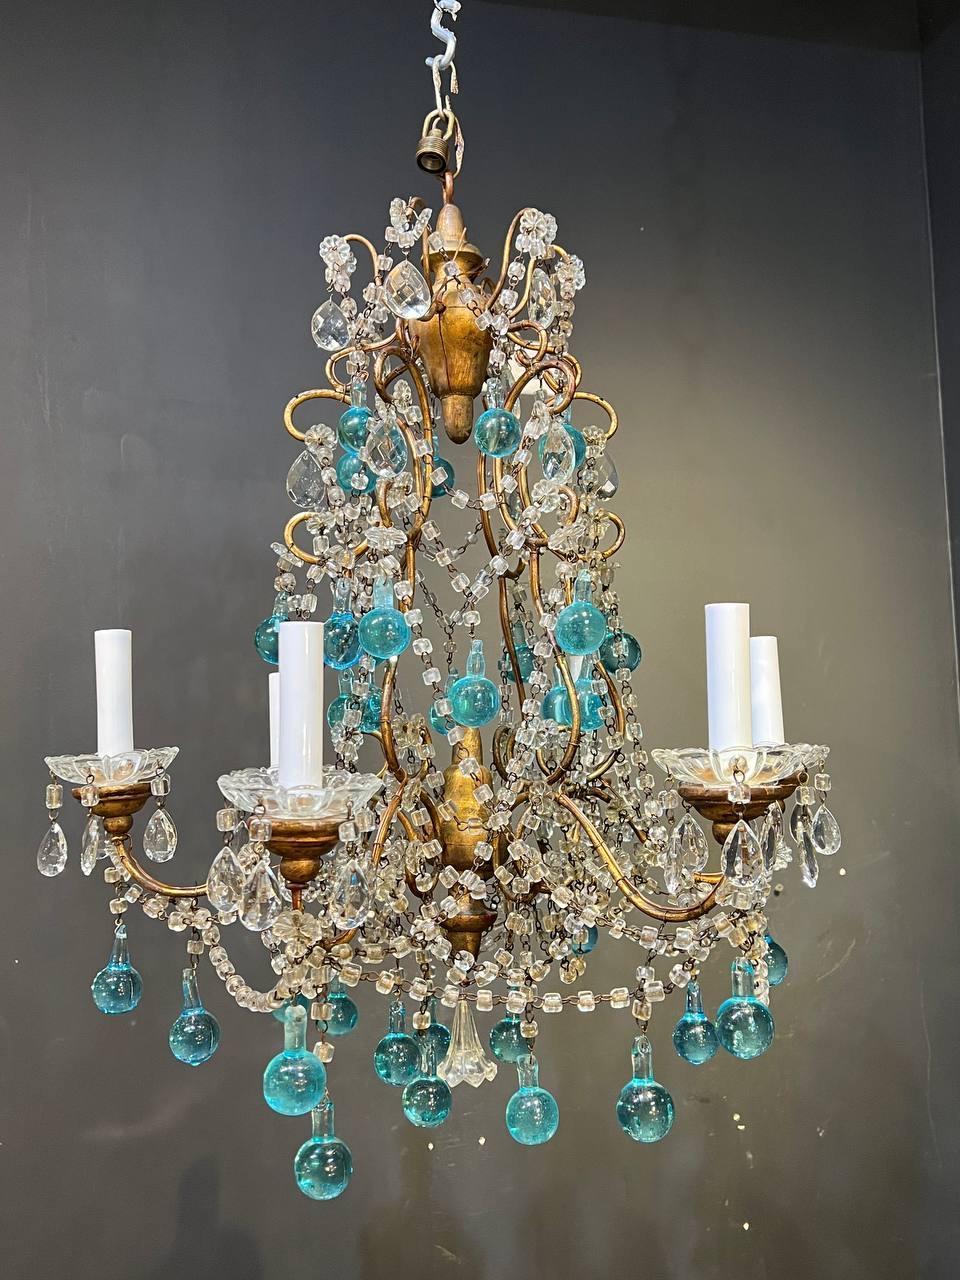 A circa 1940s French gilt metal chandelier with macaroni crystals and unusual blue crystal hangings.

Dealer: G302YP.